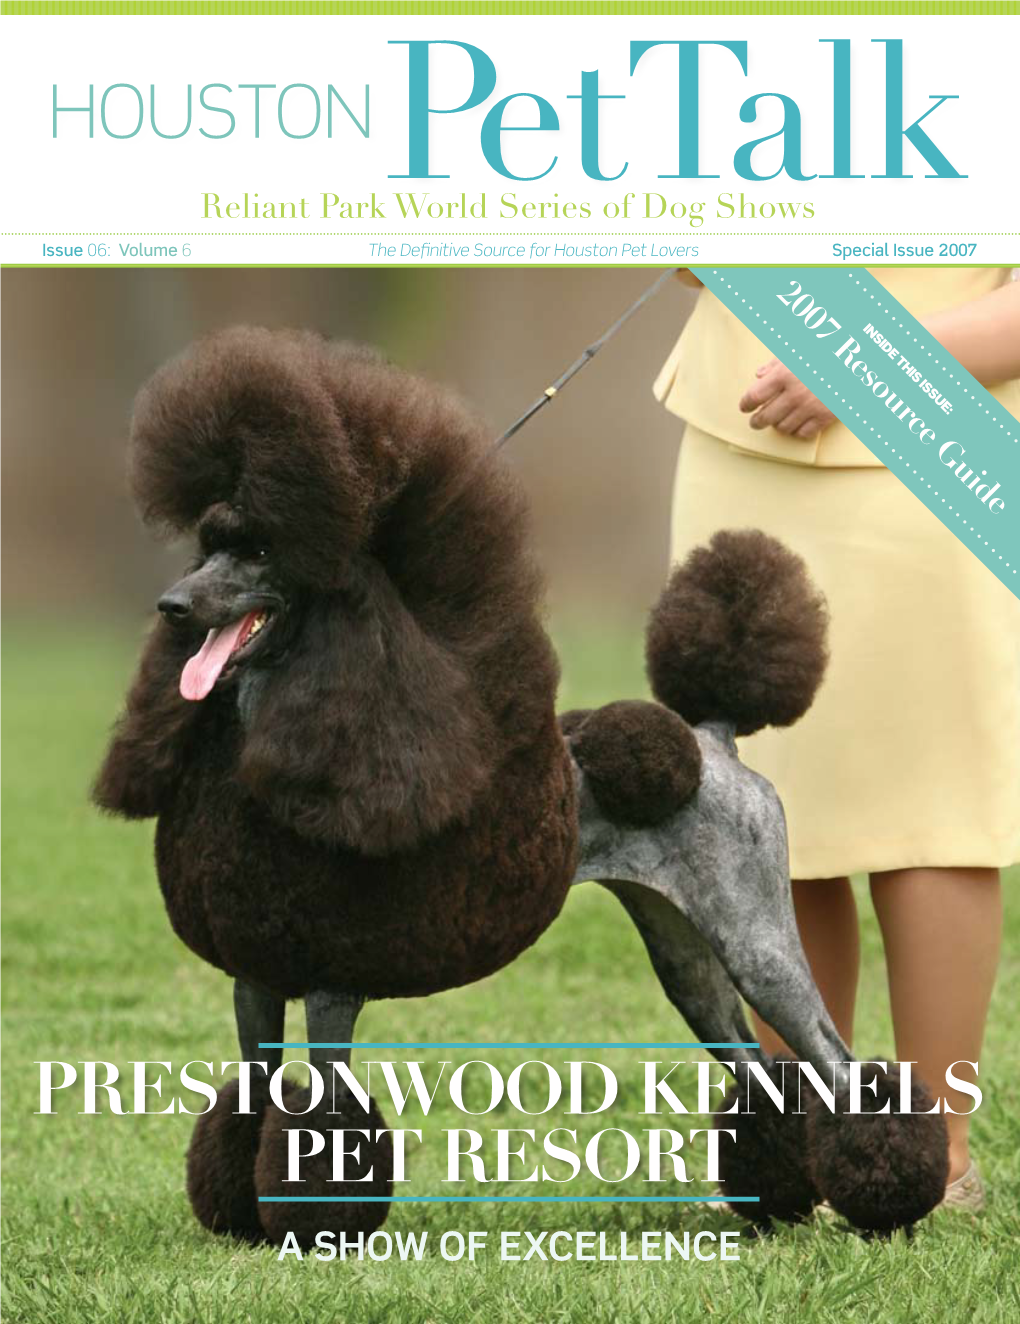 PRESTONWOOD KENNELS PET RESORT a SHOW of EXCELLENCE Who’Swho’S Inin Charge...Charge